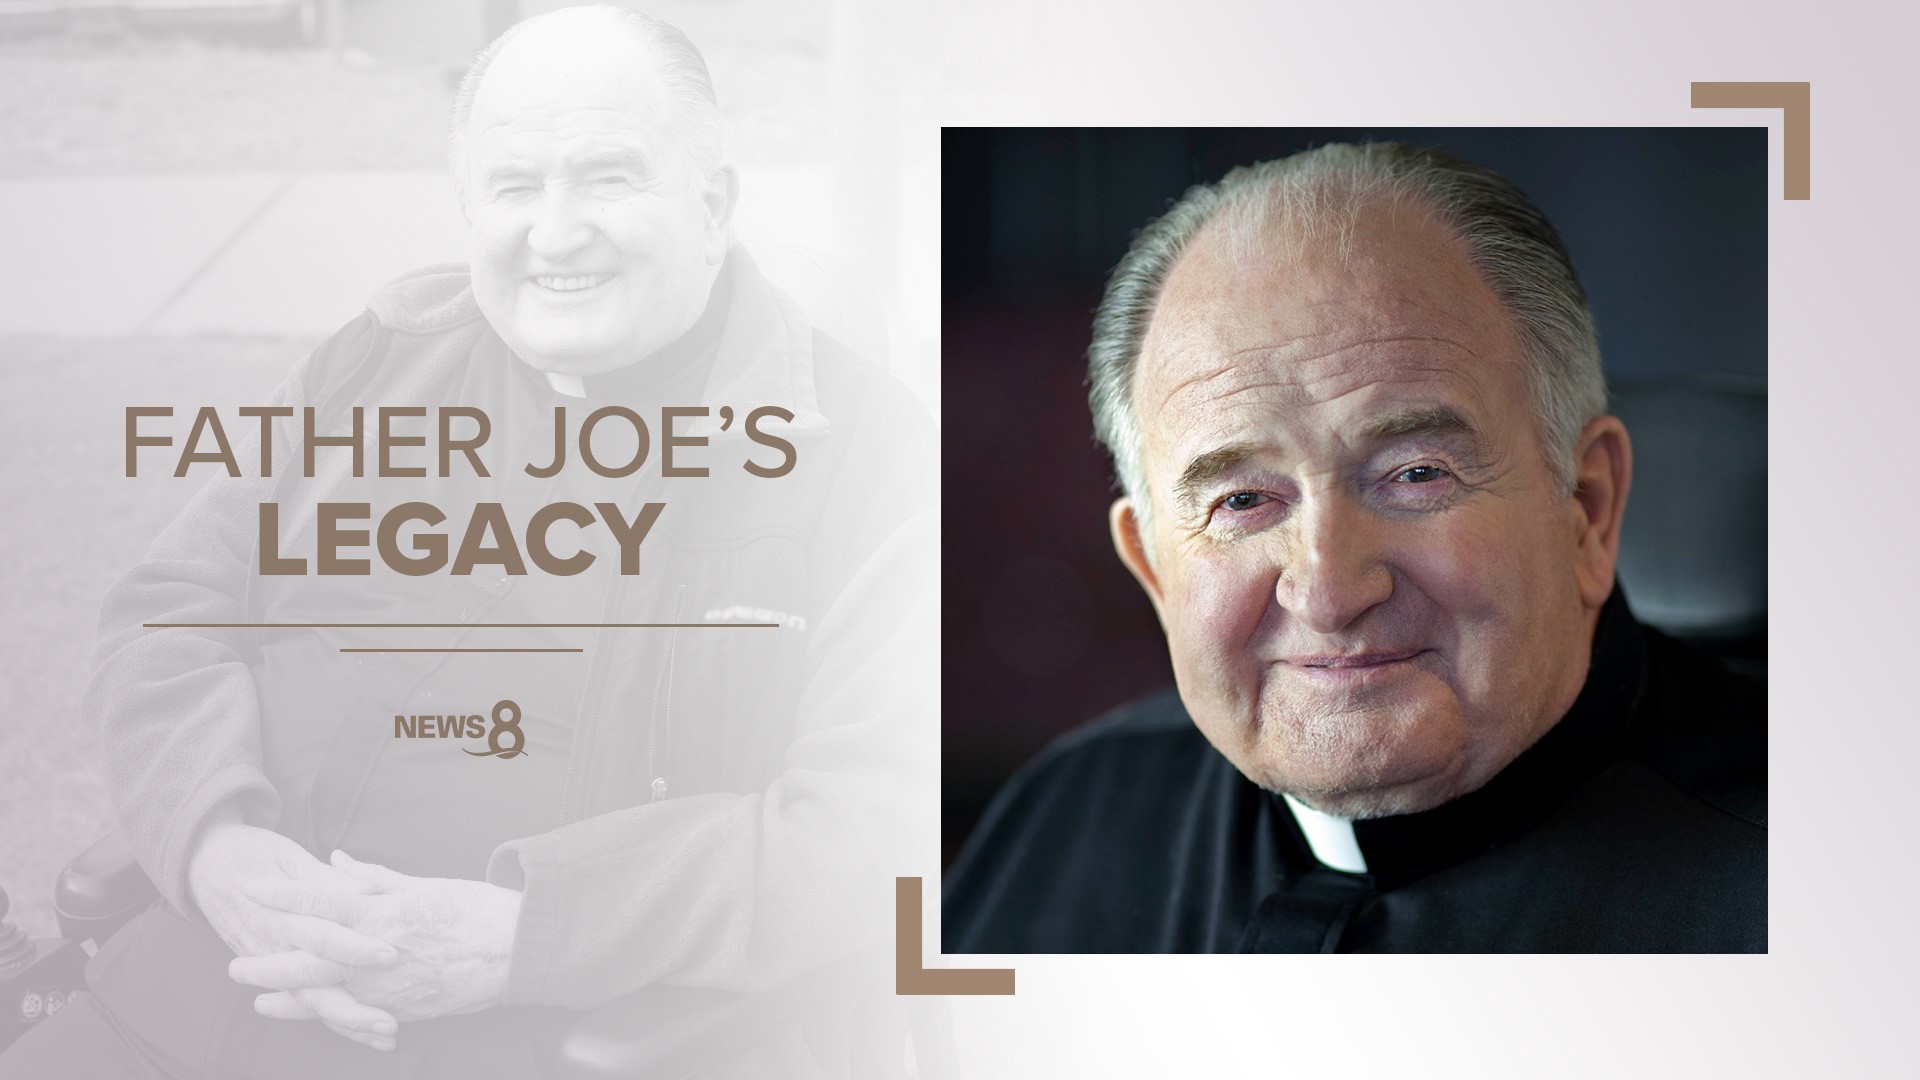 Those who knew him best, say Father Joe's tenacity laid the foundation for helping others that extends well beyond his East Village complex.